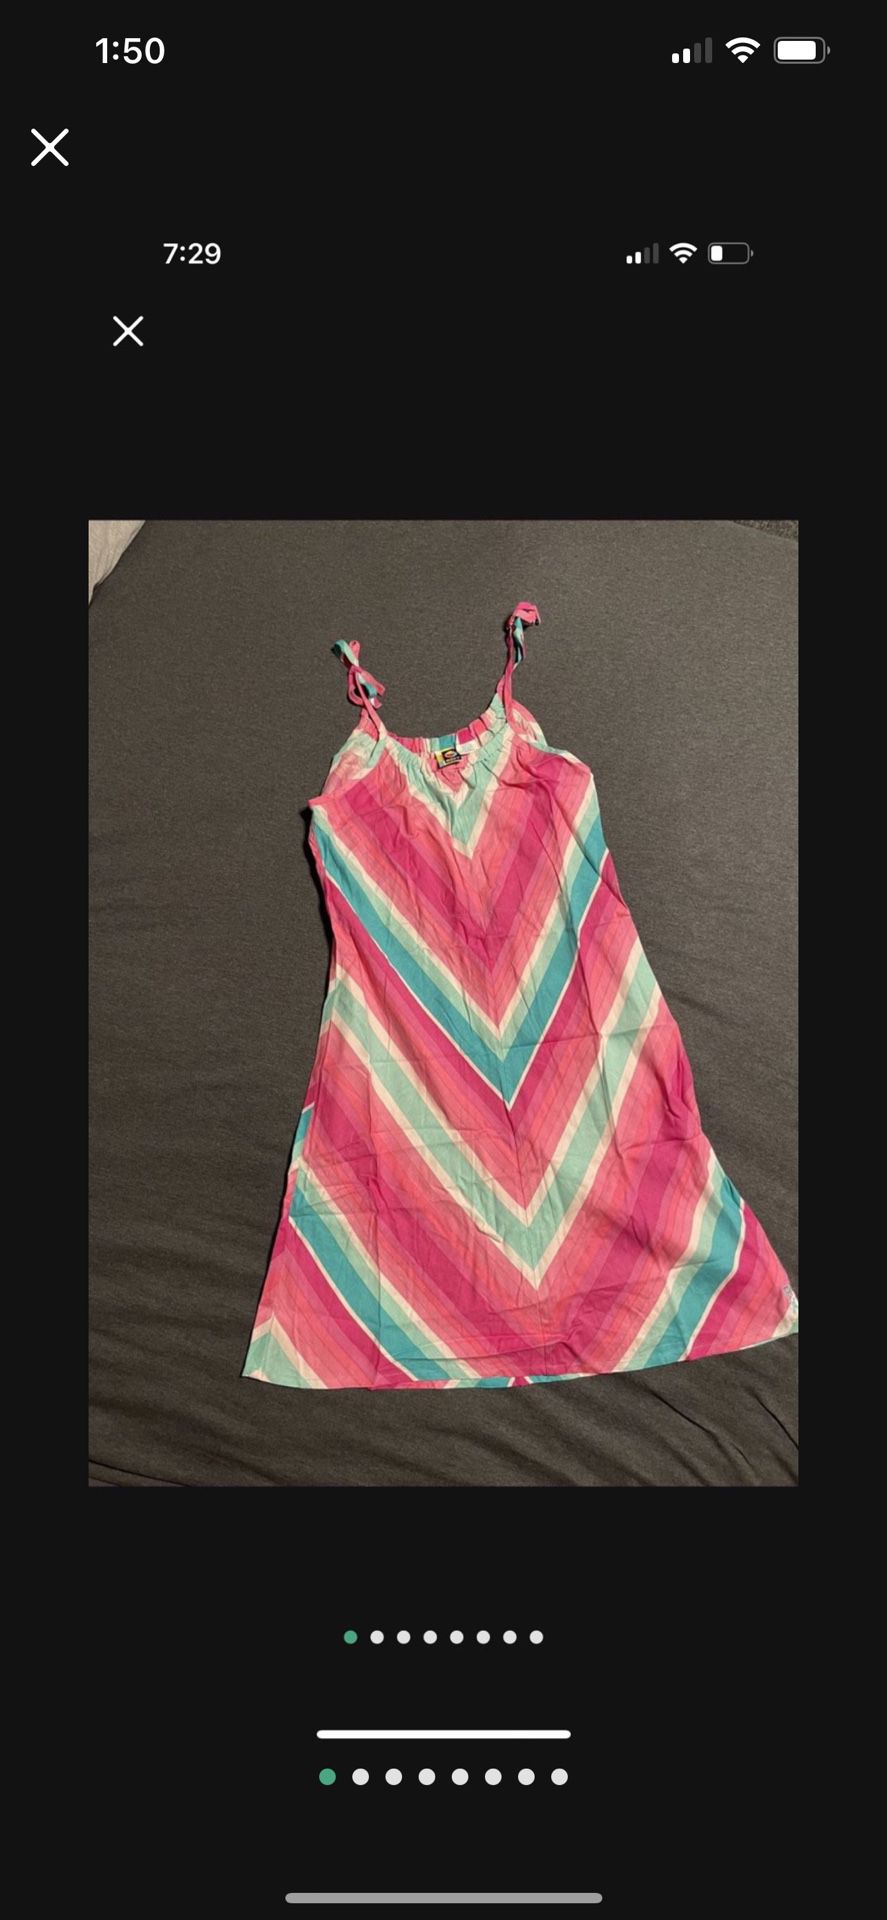 2010s Roxy Quicksilver Dress Size XL Pink Teal White Like New From 2010